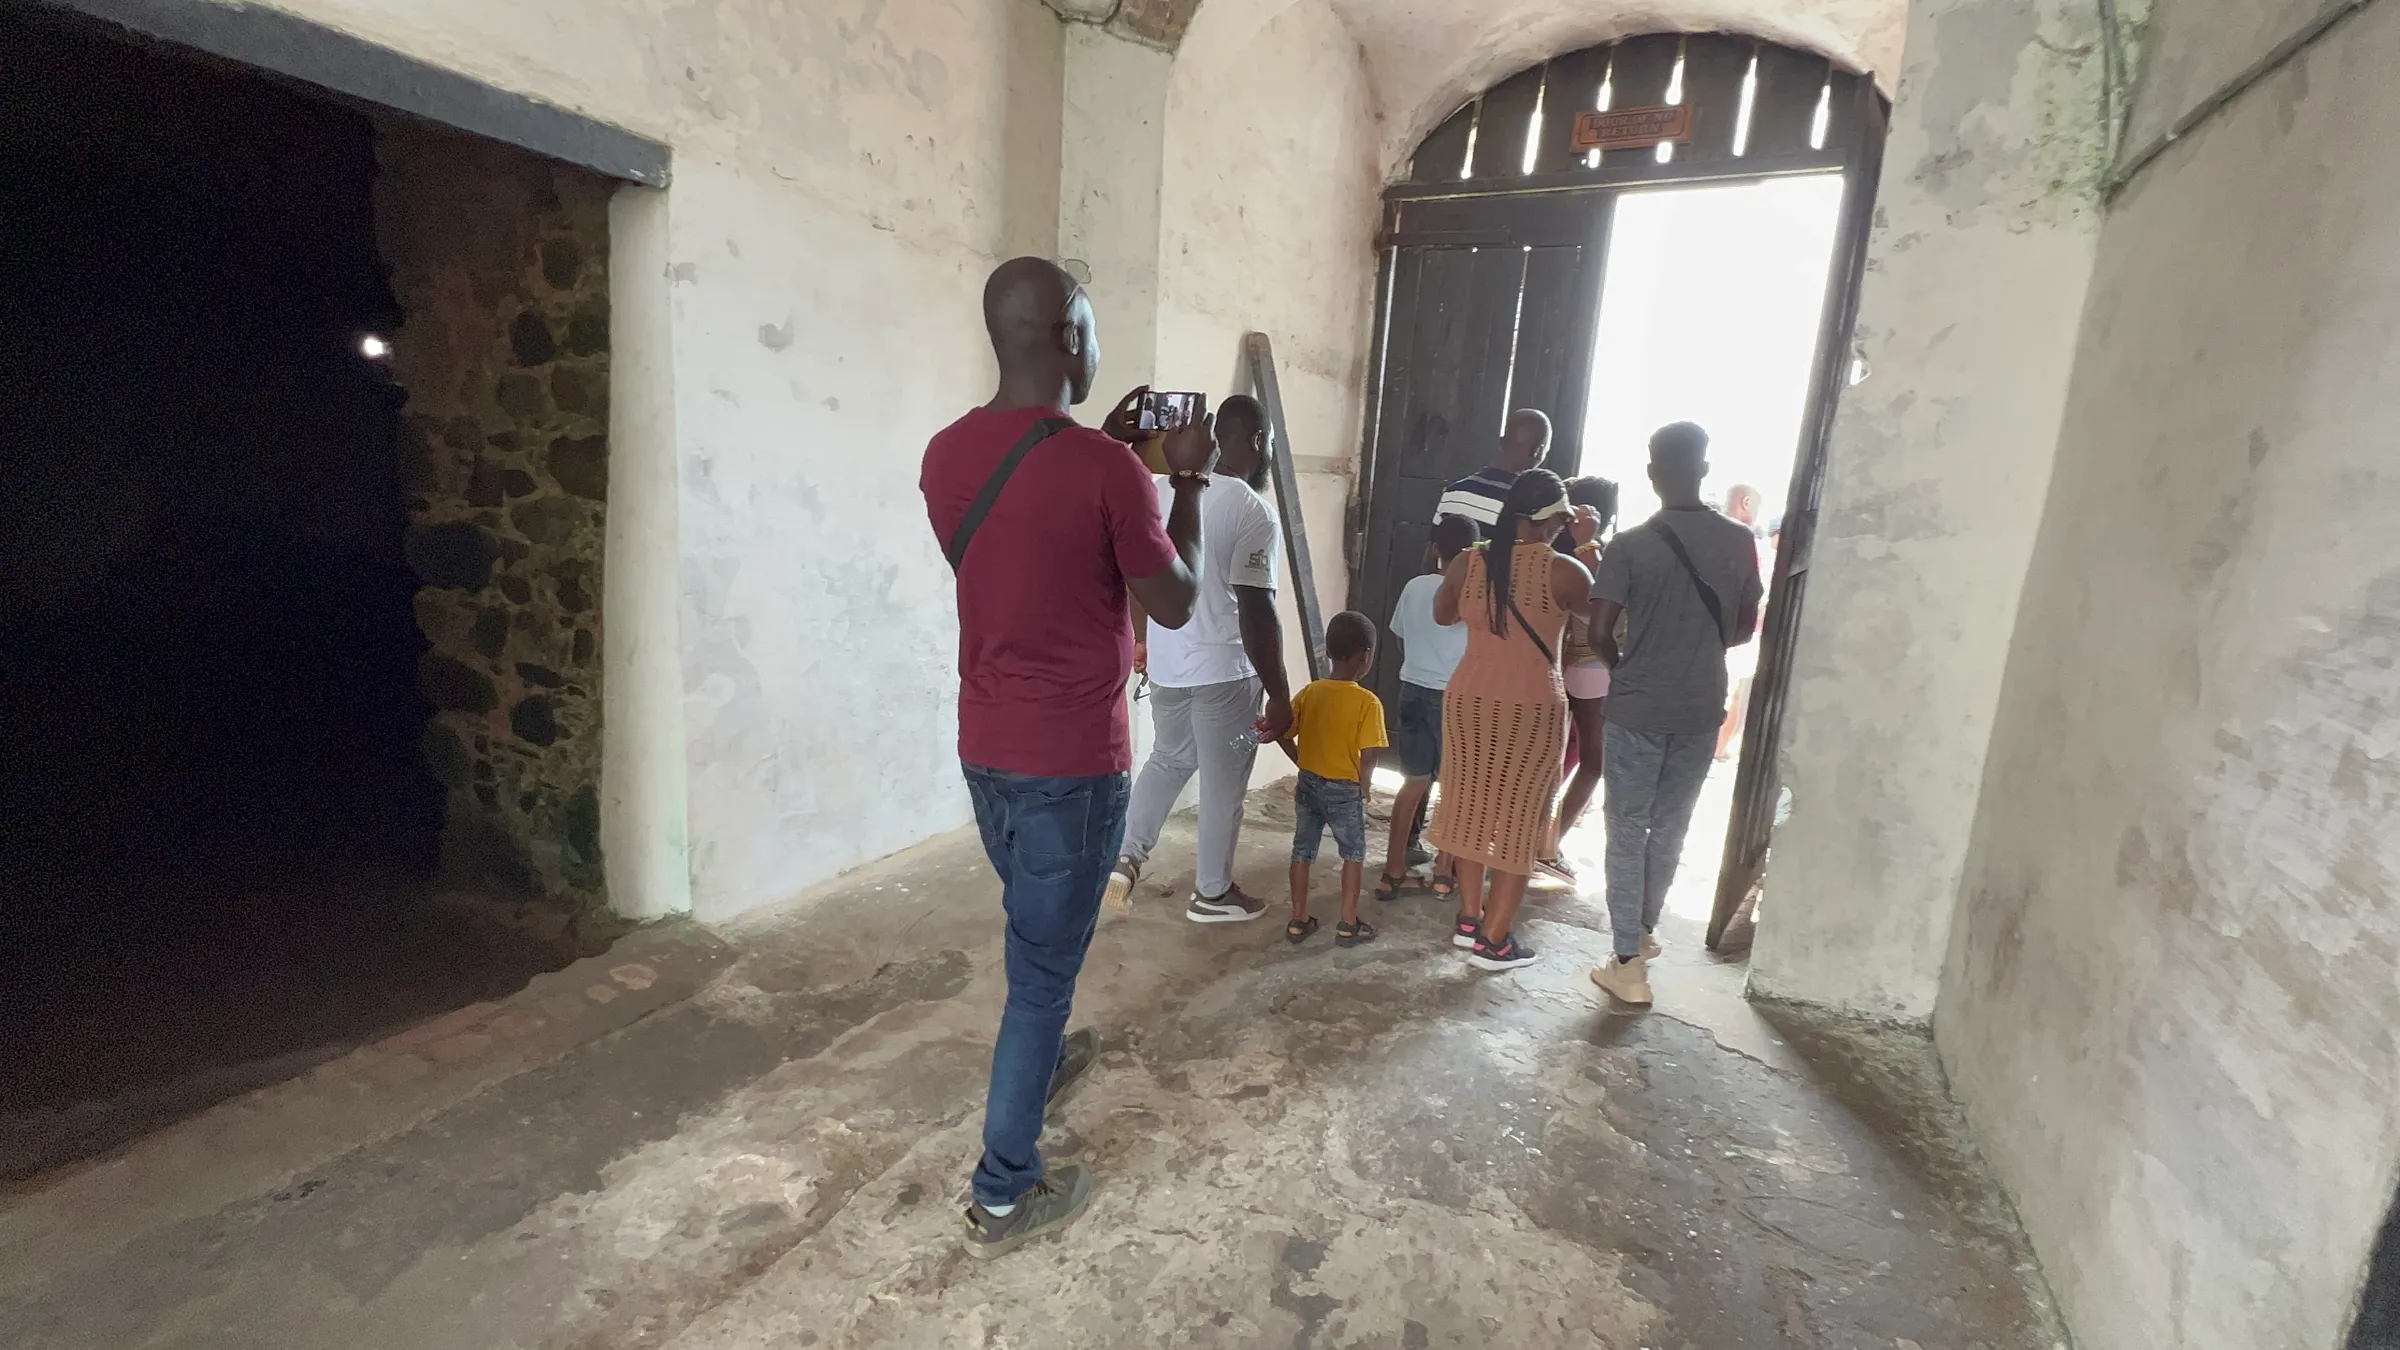 Tourists walk through the 'Door of No Return' at Cape Coast Castle on the Cape Coast, Ghana on August 9, 2022.